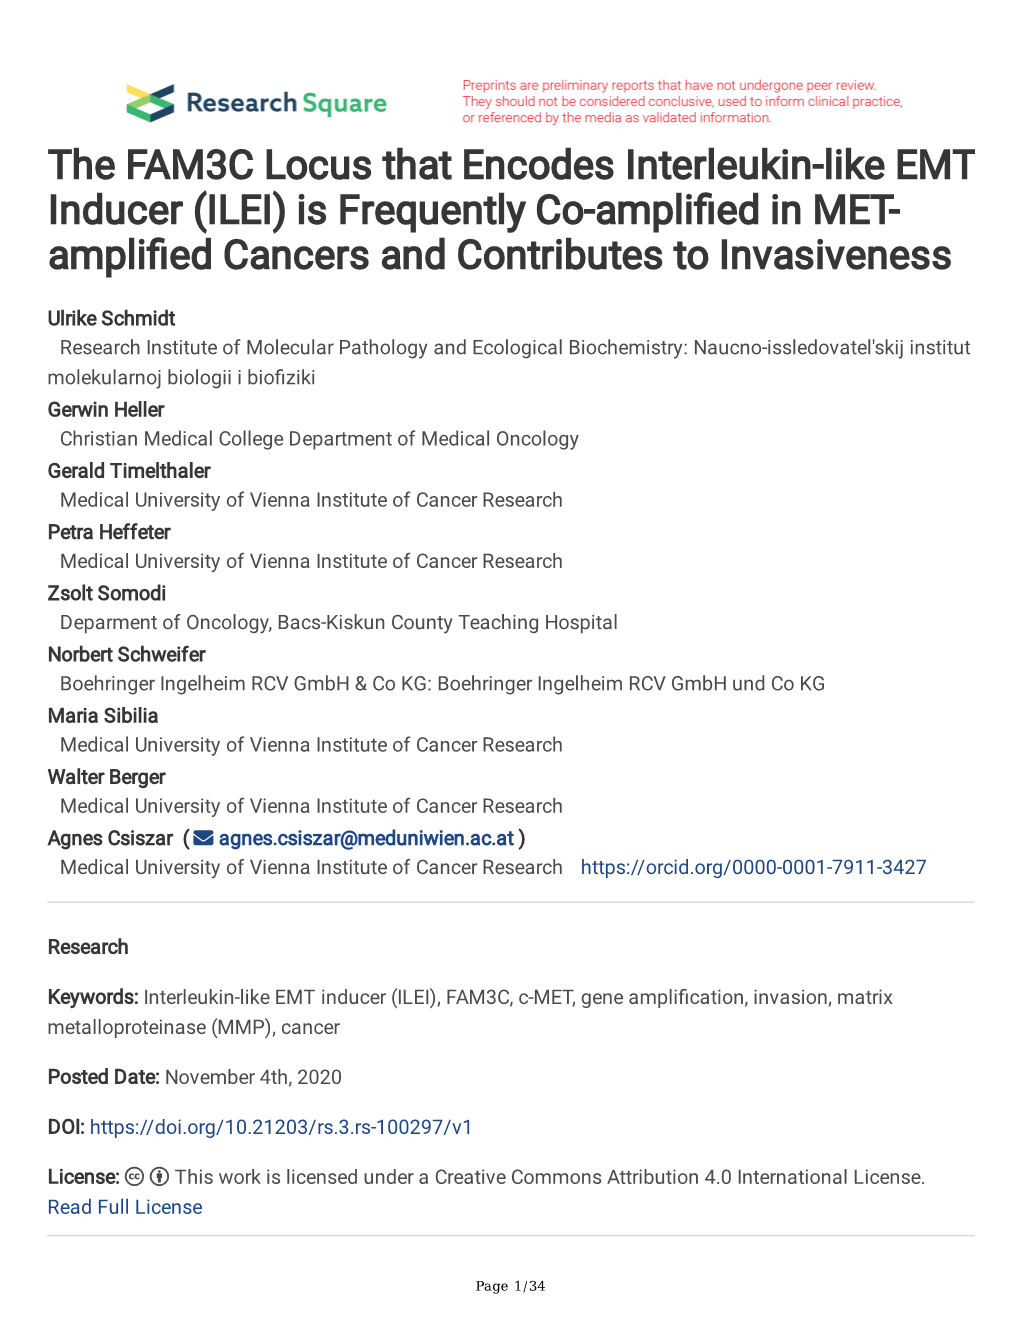 The FAM3C Locus That Encodes Interleukin-Like EMT Inducer (ILEI) Is Frequently Co-Amplifed in MET- Amplifed Cancers and Contributes to Invasiveness